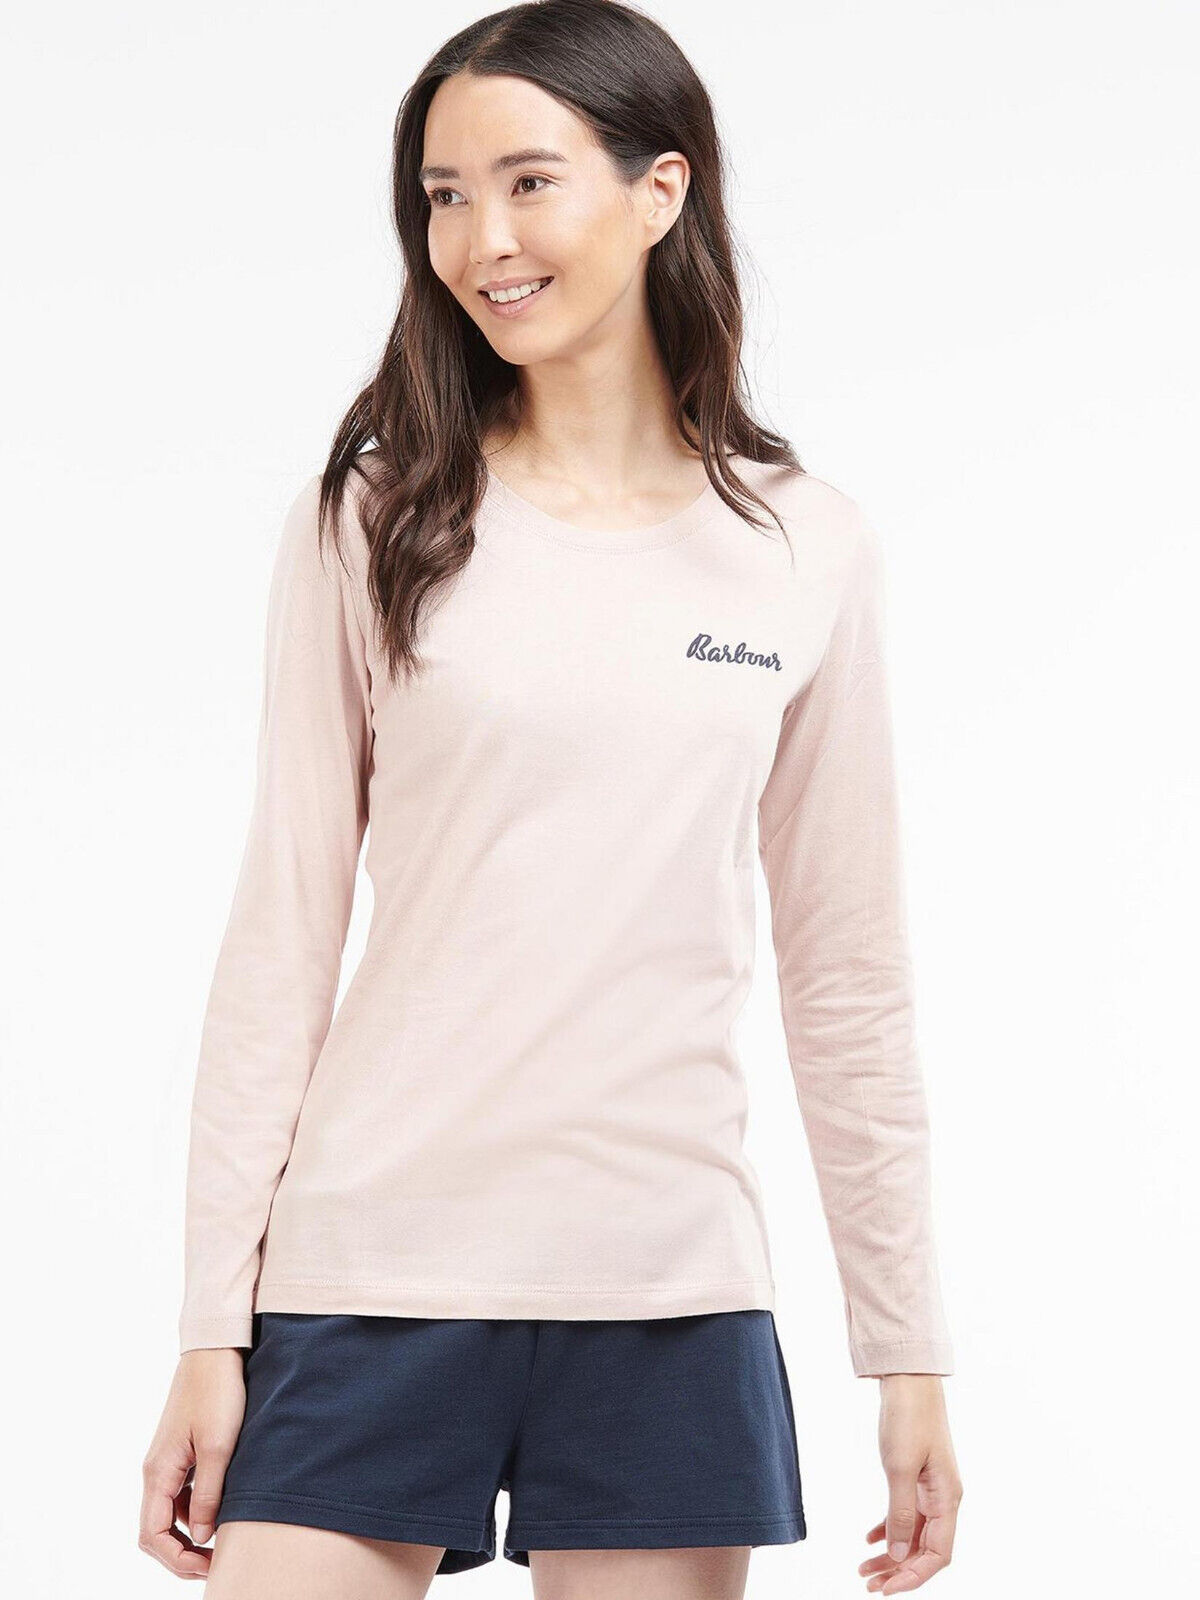 Barbour Edie Long Sleeve Lounge Top - Light Pink. UK XS. ****V473